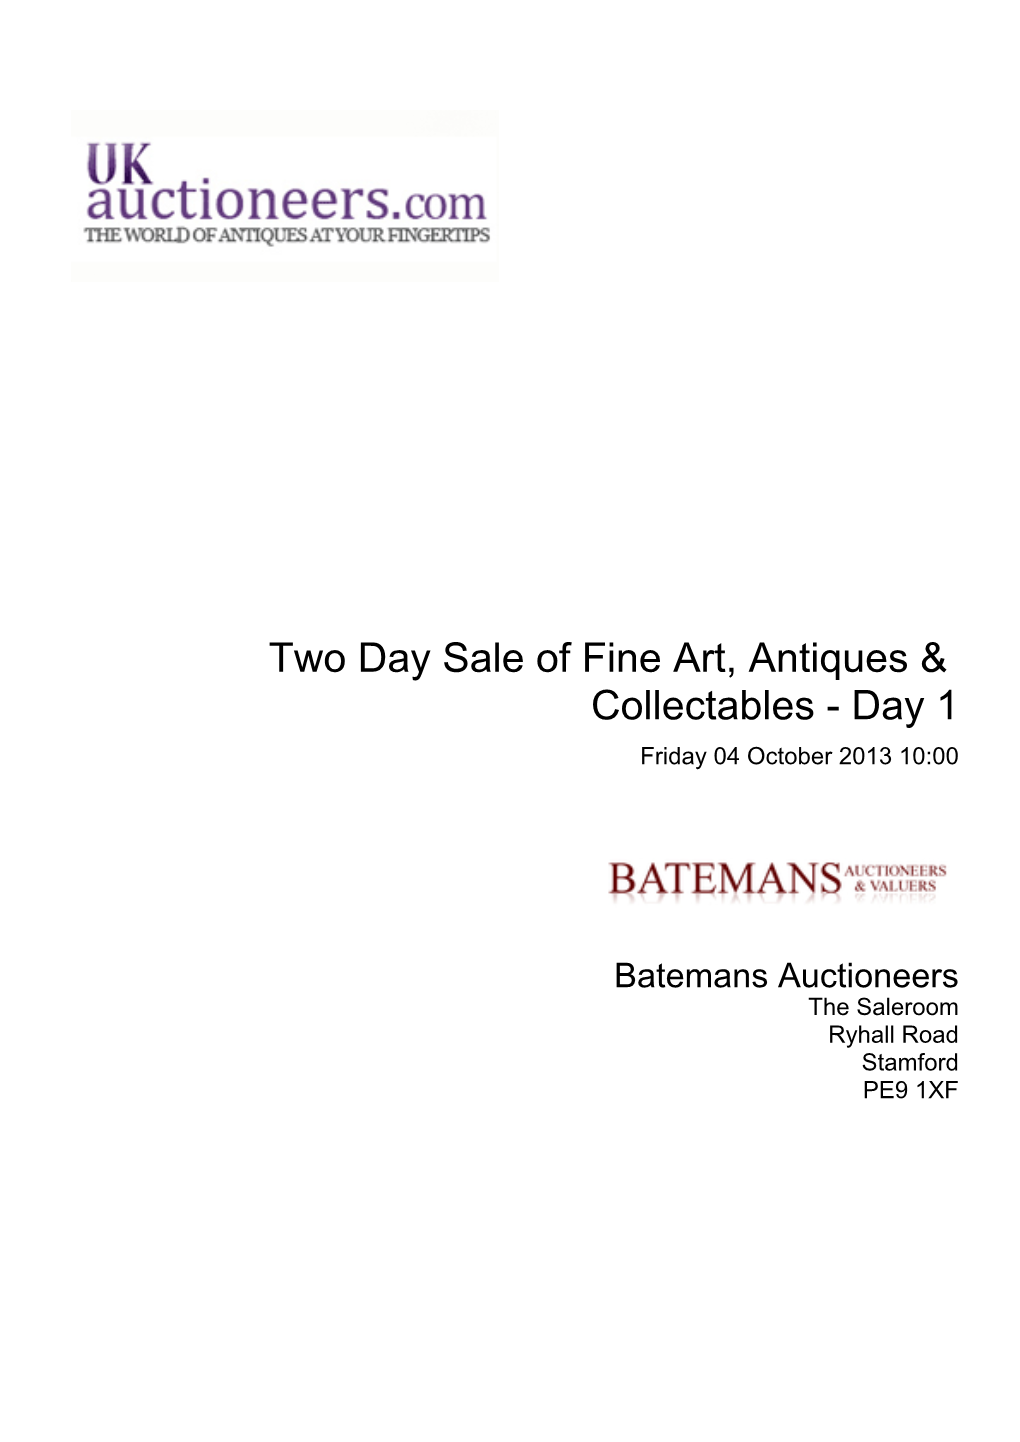 Two Day Sale of Fine Art, Antiques & Collectables